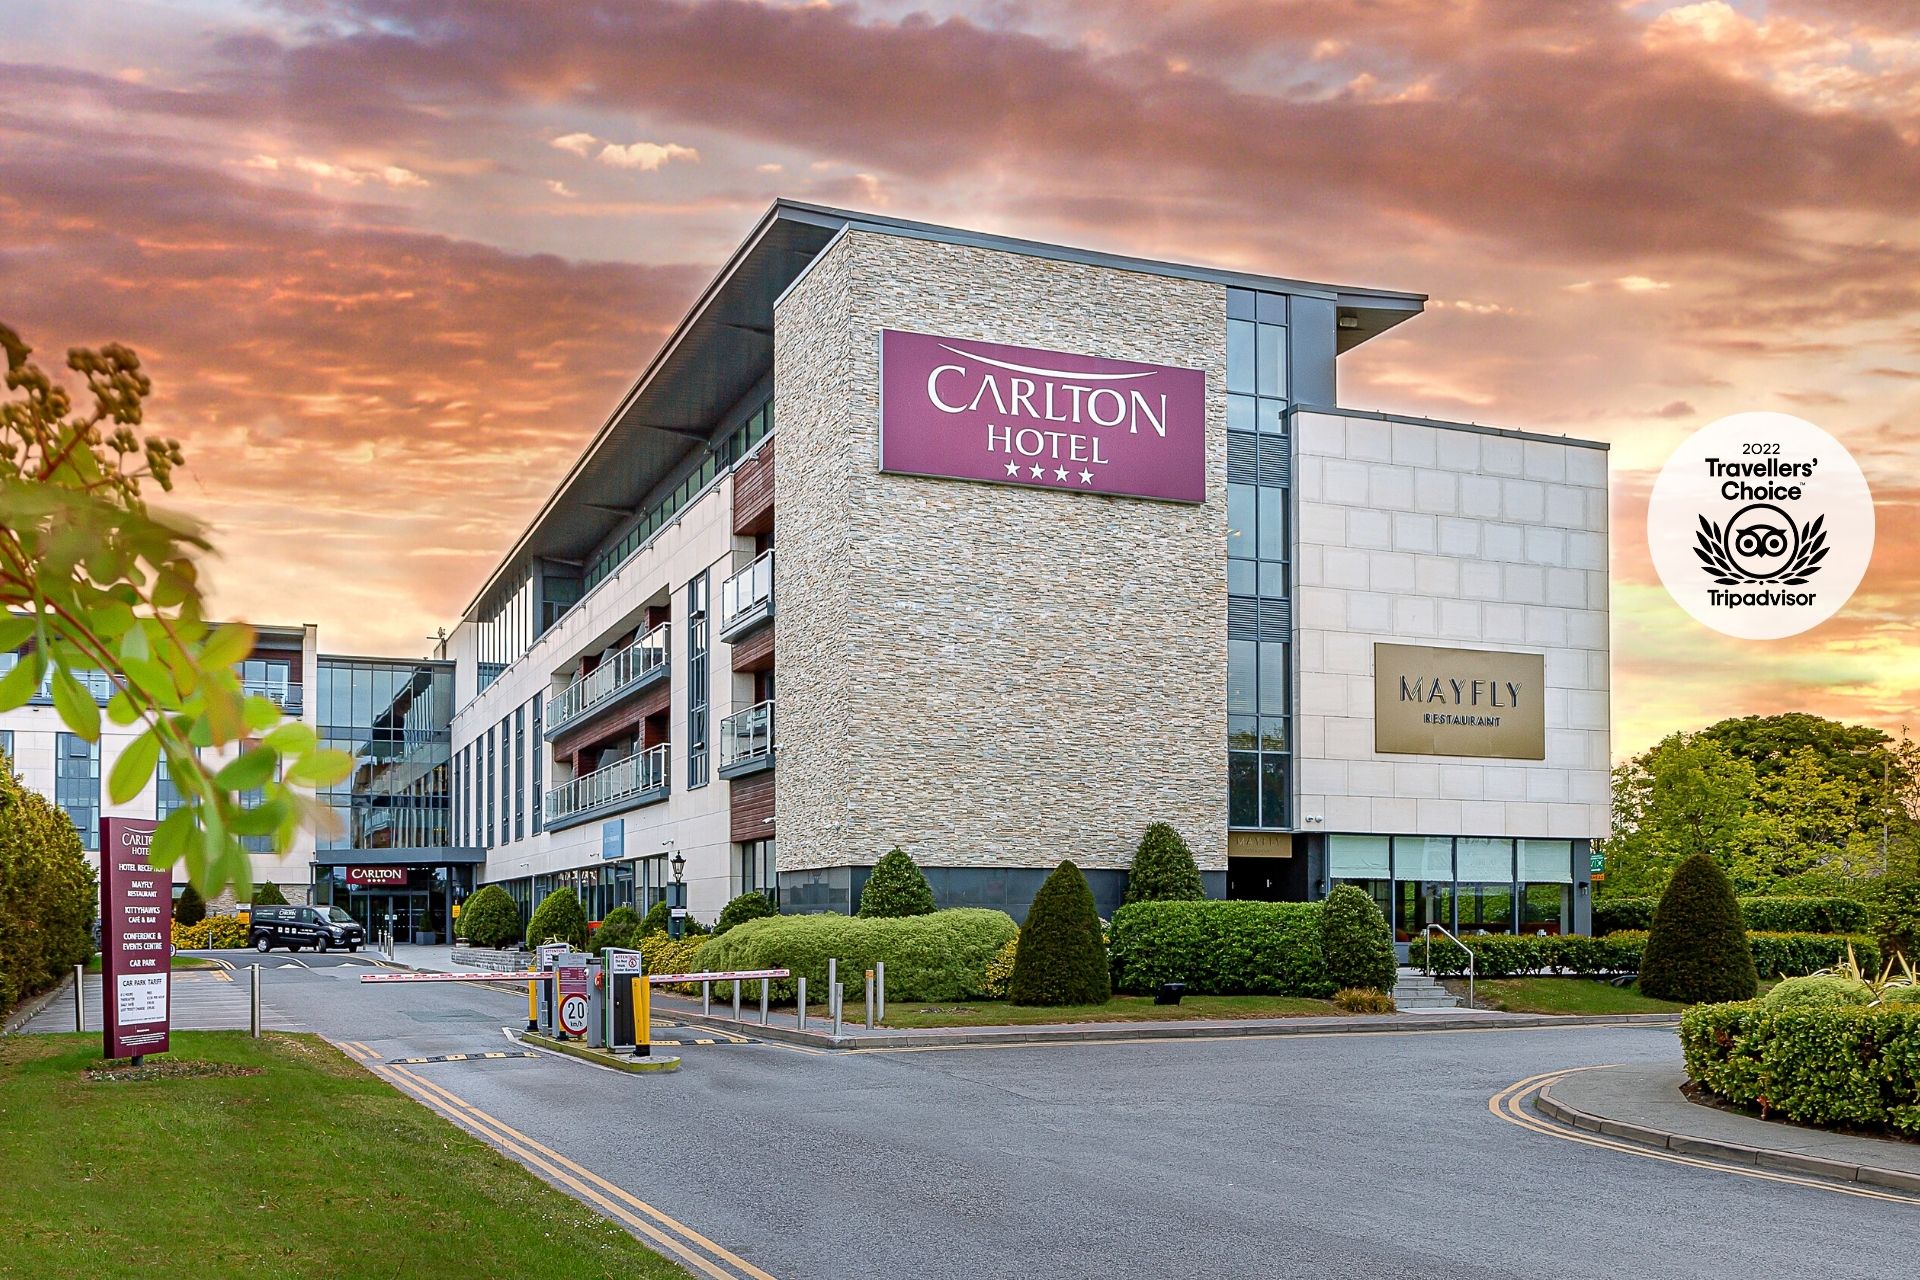 Carlton Hotel see 70% growth in revenue since moving to Net Affinity